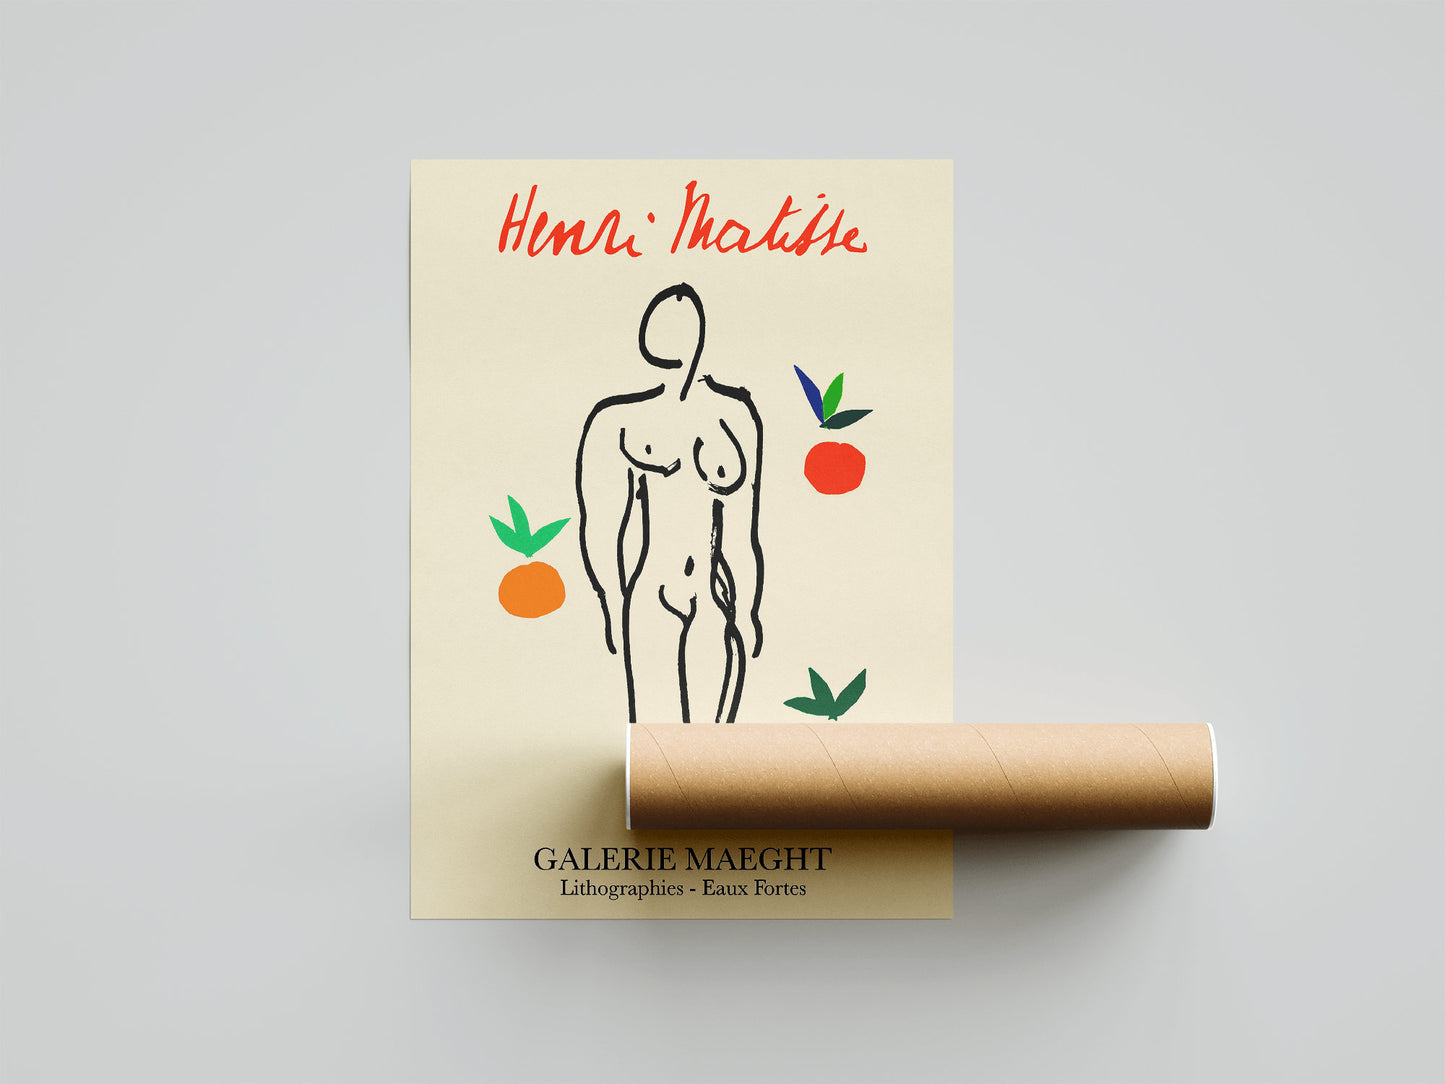 Henri Matisse Nude with Oranges Exhibition Poster, Home Decor Wall Art